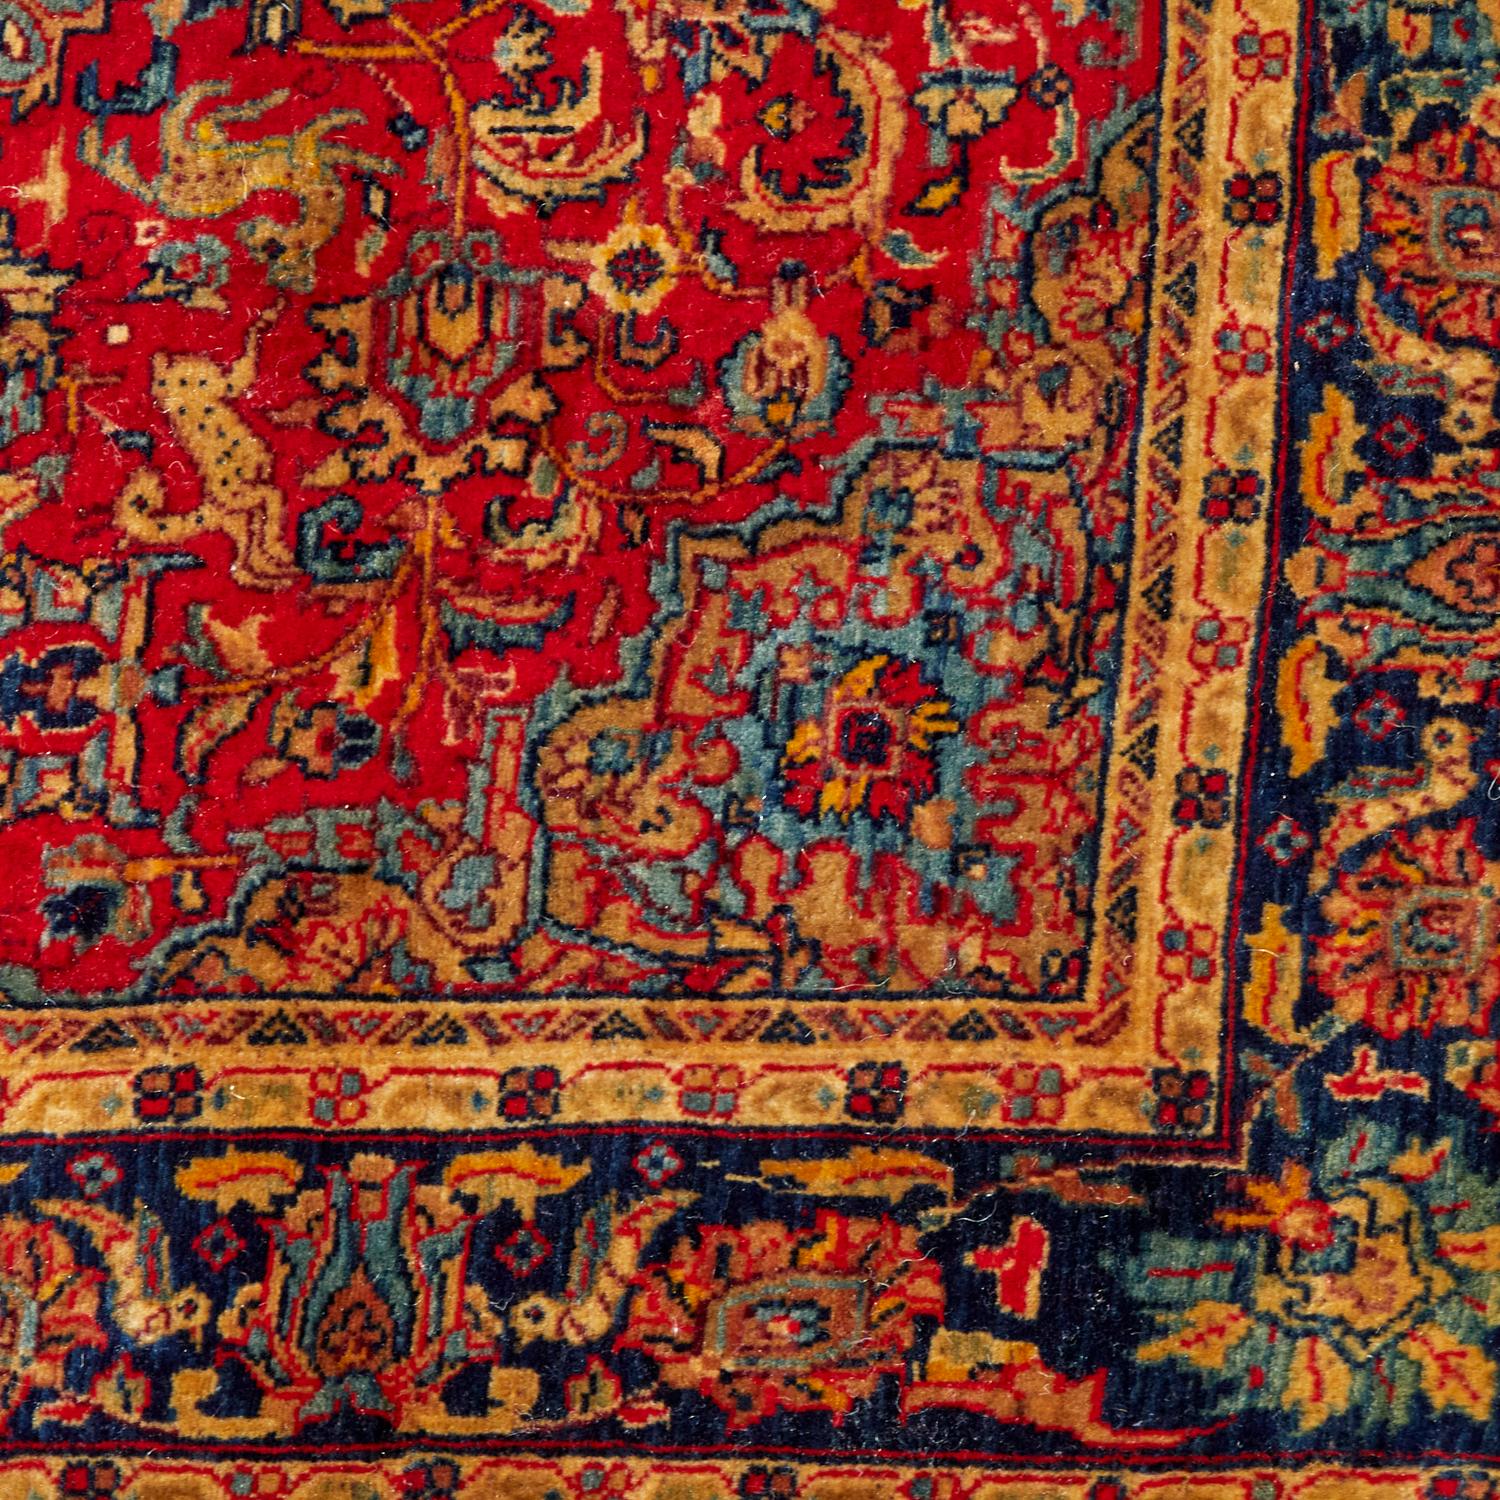 Early 20th c., tightly knotted Sarouk rug, likely Farahan Sarouk, in rich jewel tone colors with a central medallion surrounded by birds and animals with flora and fauna.

Hand-knotted Persian Sarouk or Sarough rugs are very attractive and are